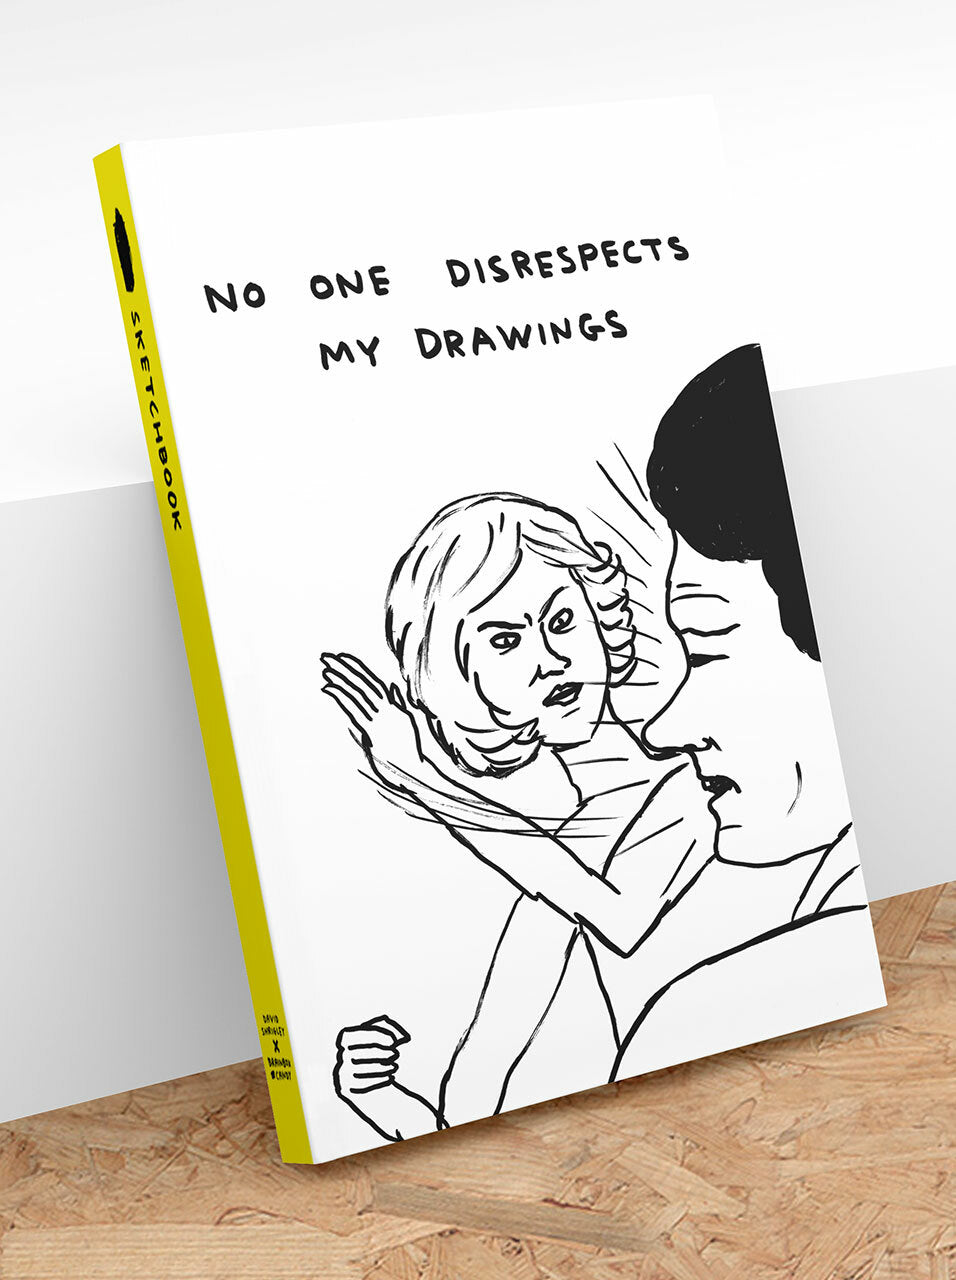 David Shrigley - Sketchbook "No One Disrespects My Drawings"